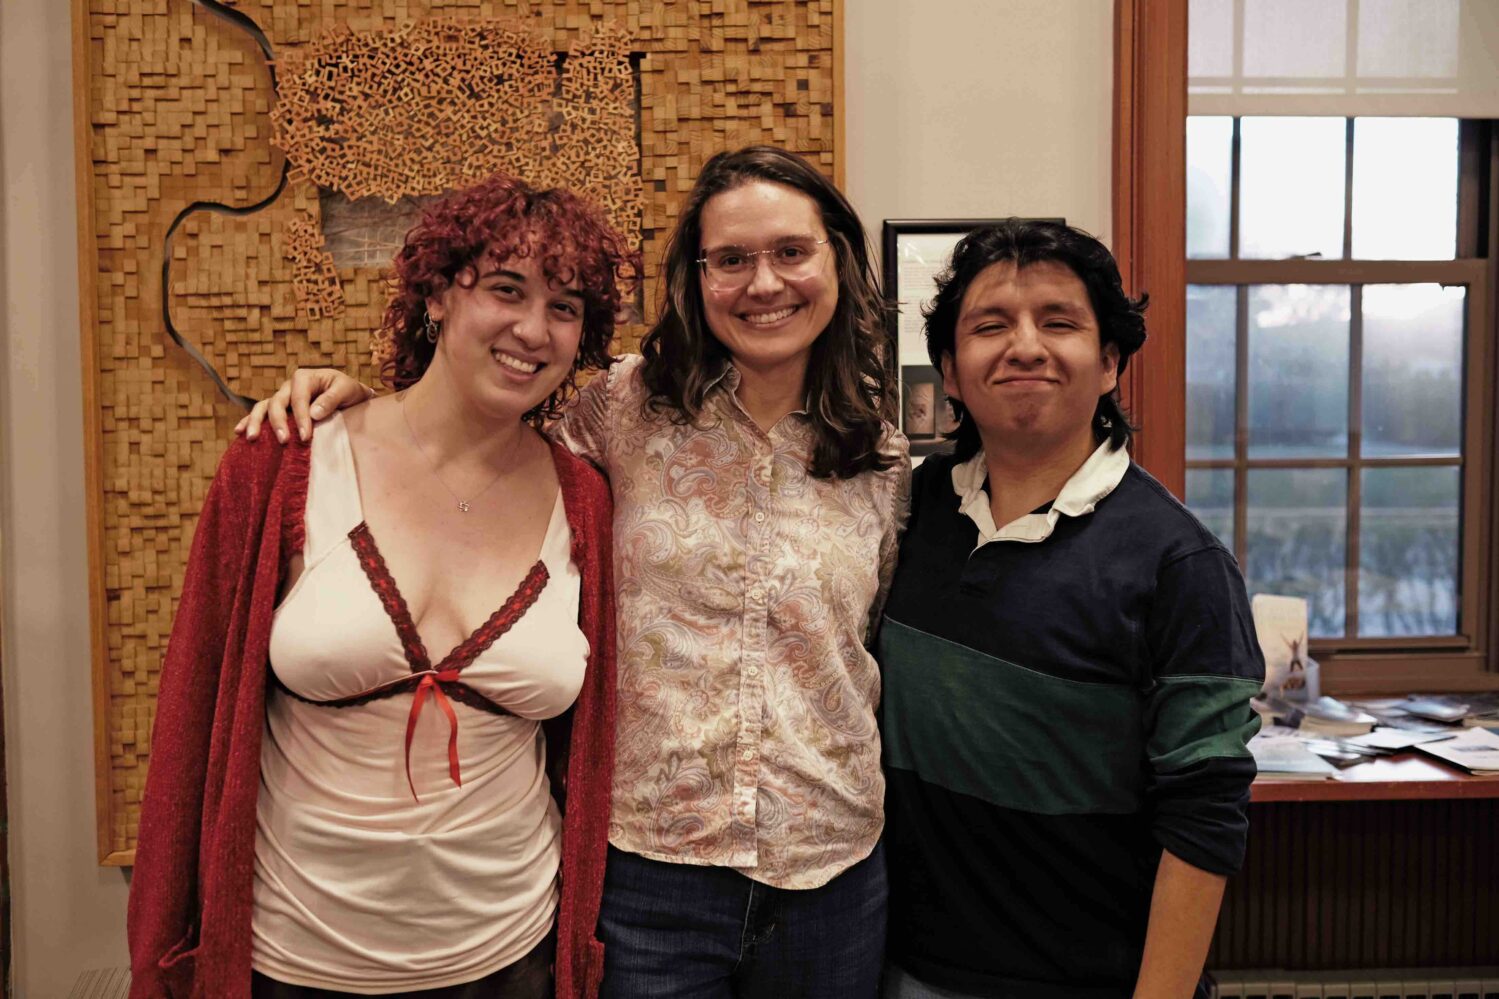 One young woman with curly hair, a woman with long brown hair, and a young man with dark hair stand with arms around each others shoulders in front of a wooden piece of art.